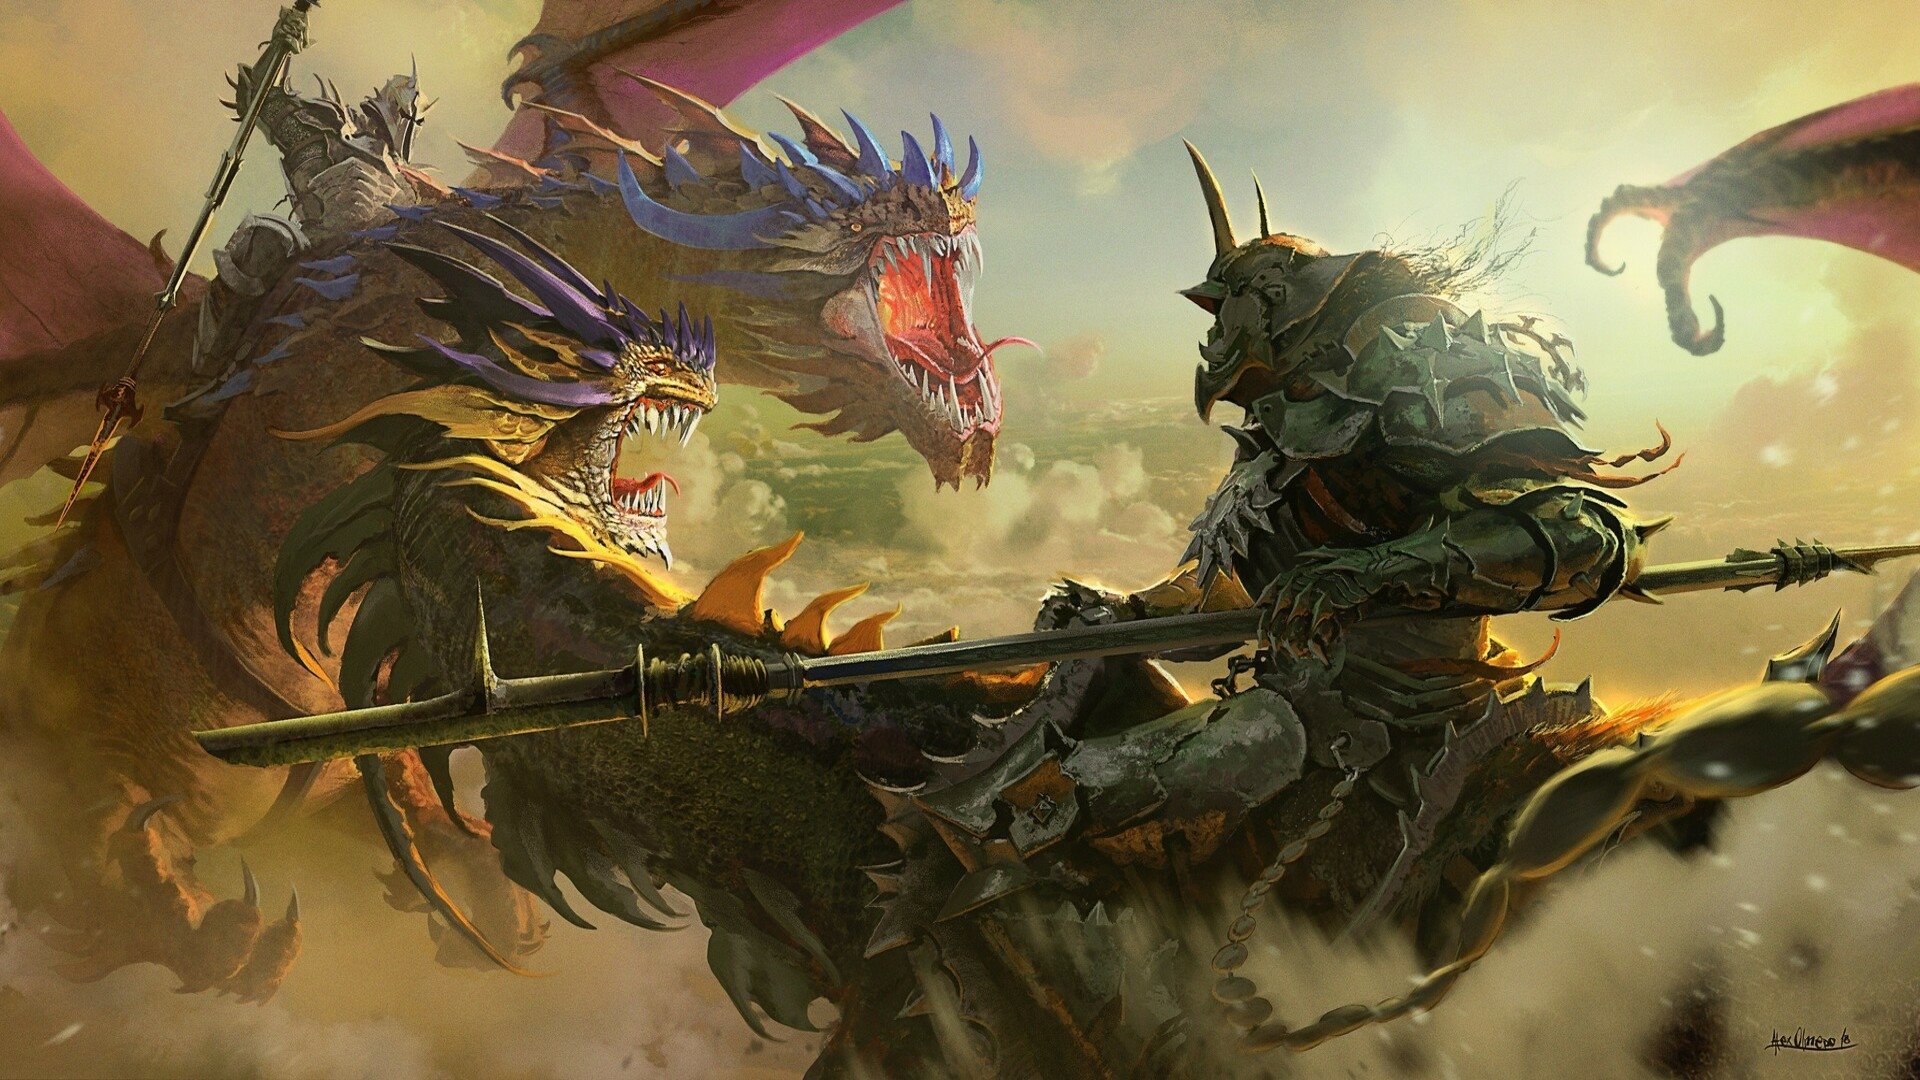 A fierce fantasy warrior facing a majestic dragon in an epic battle, set in high-definition for a captivating desktop wallpaper.